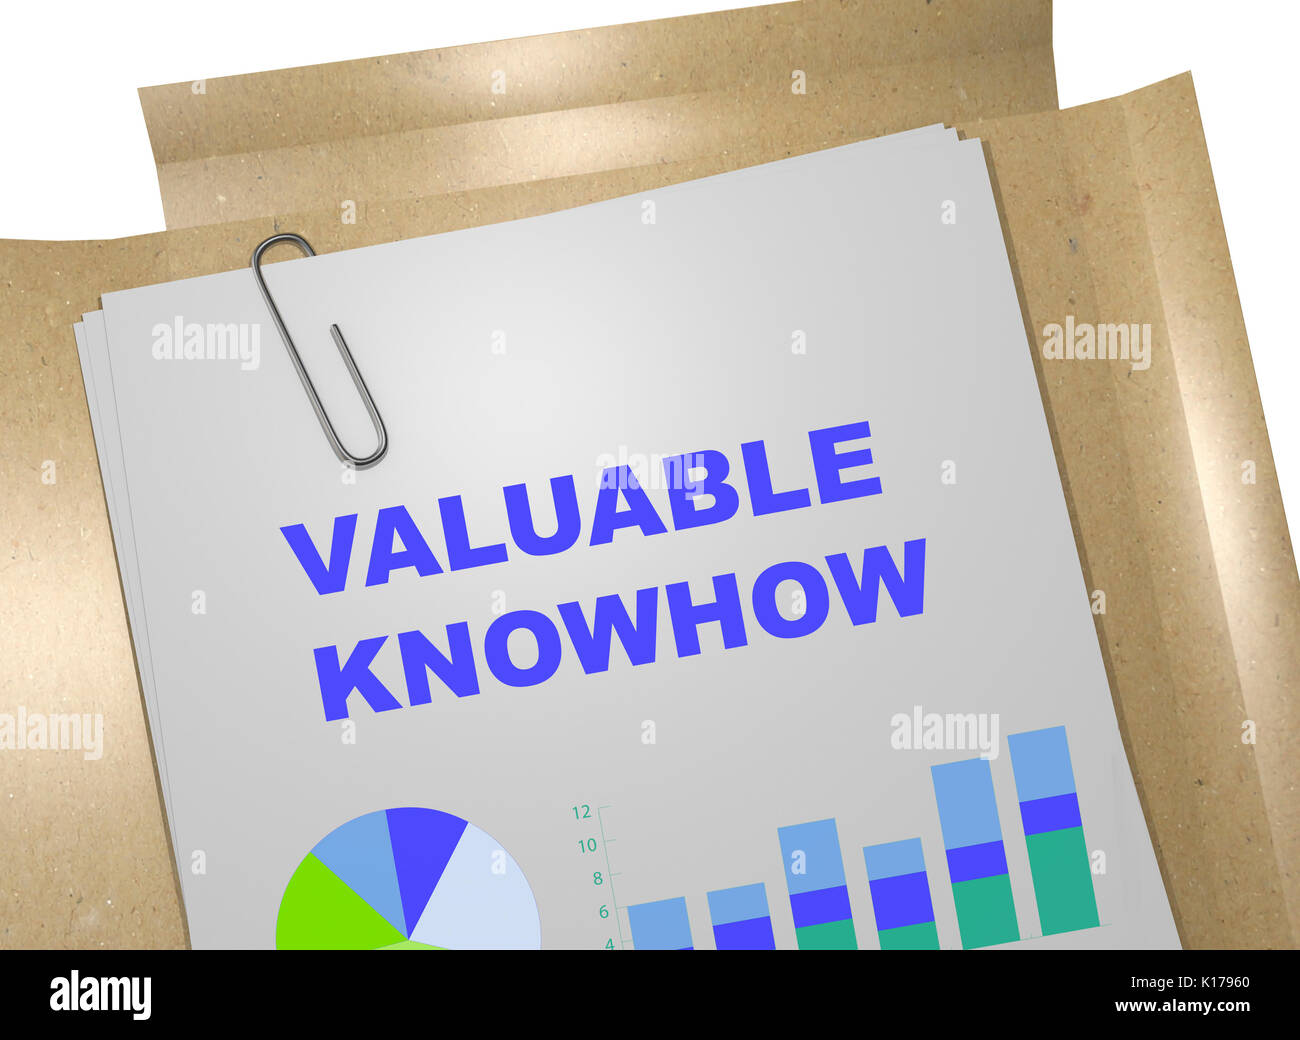 3D illustration of 'VALUABLE KNOWHOW' title on business document. Business concept. Stock Photo